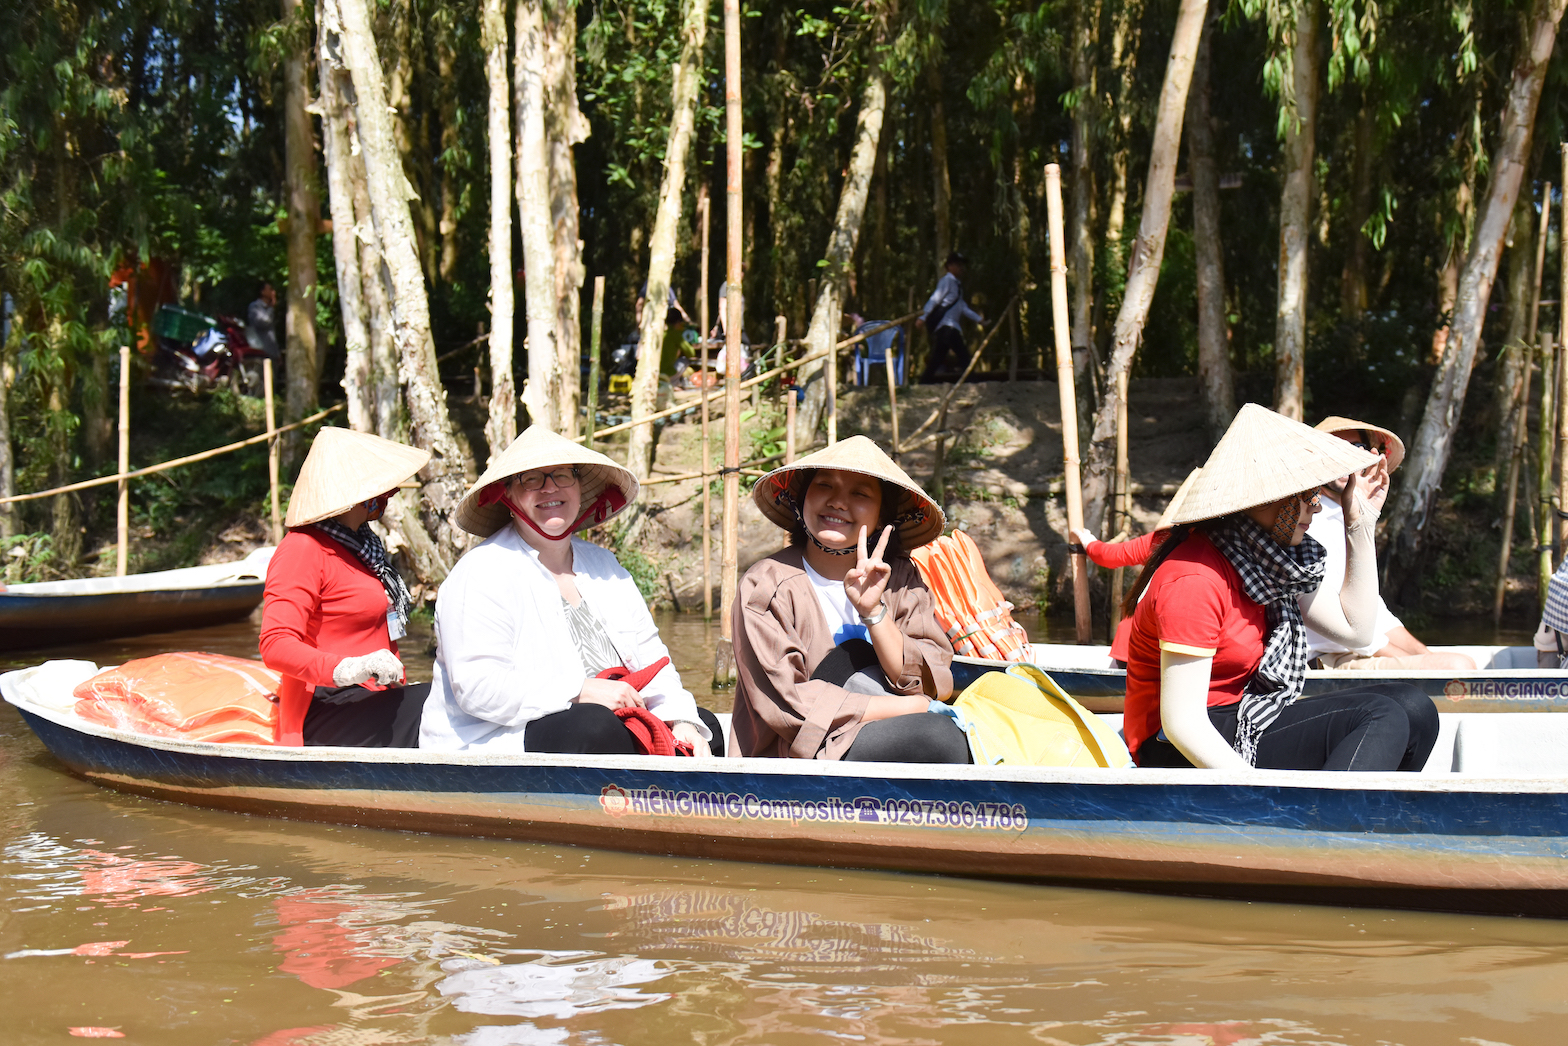 U.S. Consul General Marie Damour tours Tra Su Cajuput Forest during a visit to An Giang Province, Vietnam on November 19, 2019. Photo: U.S. Consulate General in Ho Chi Minh City